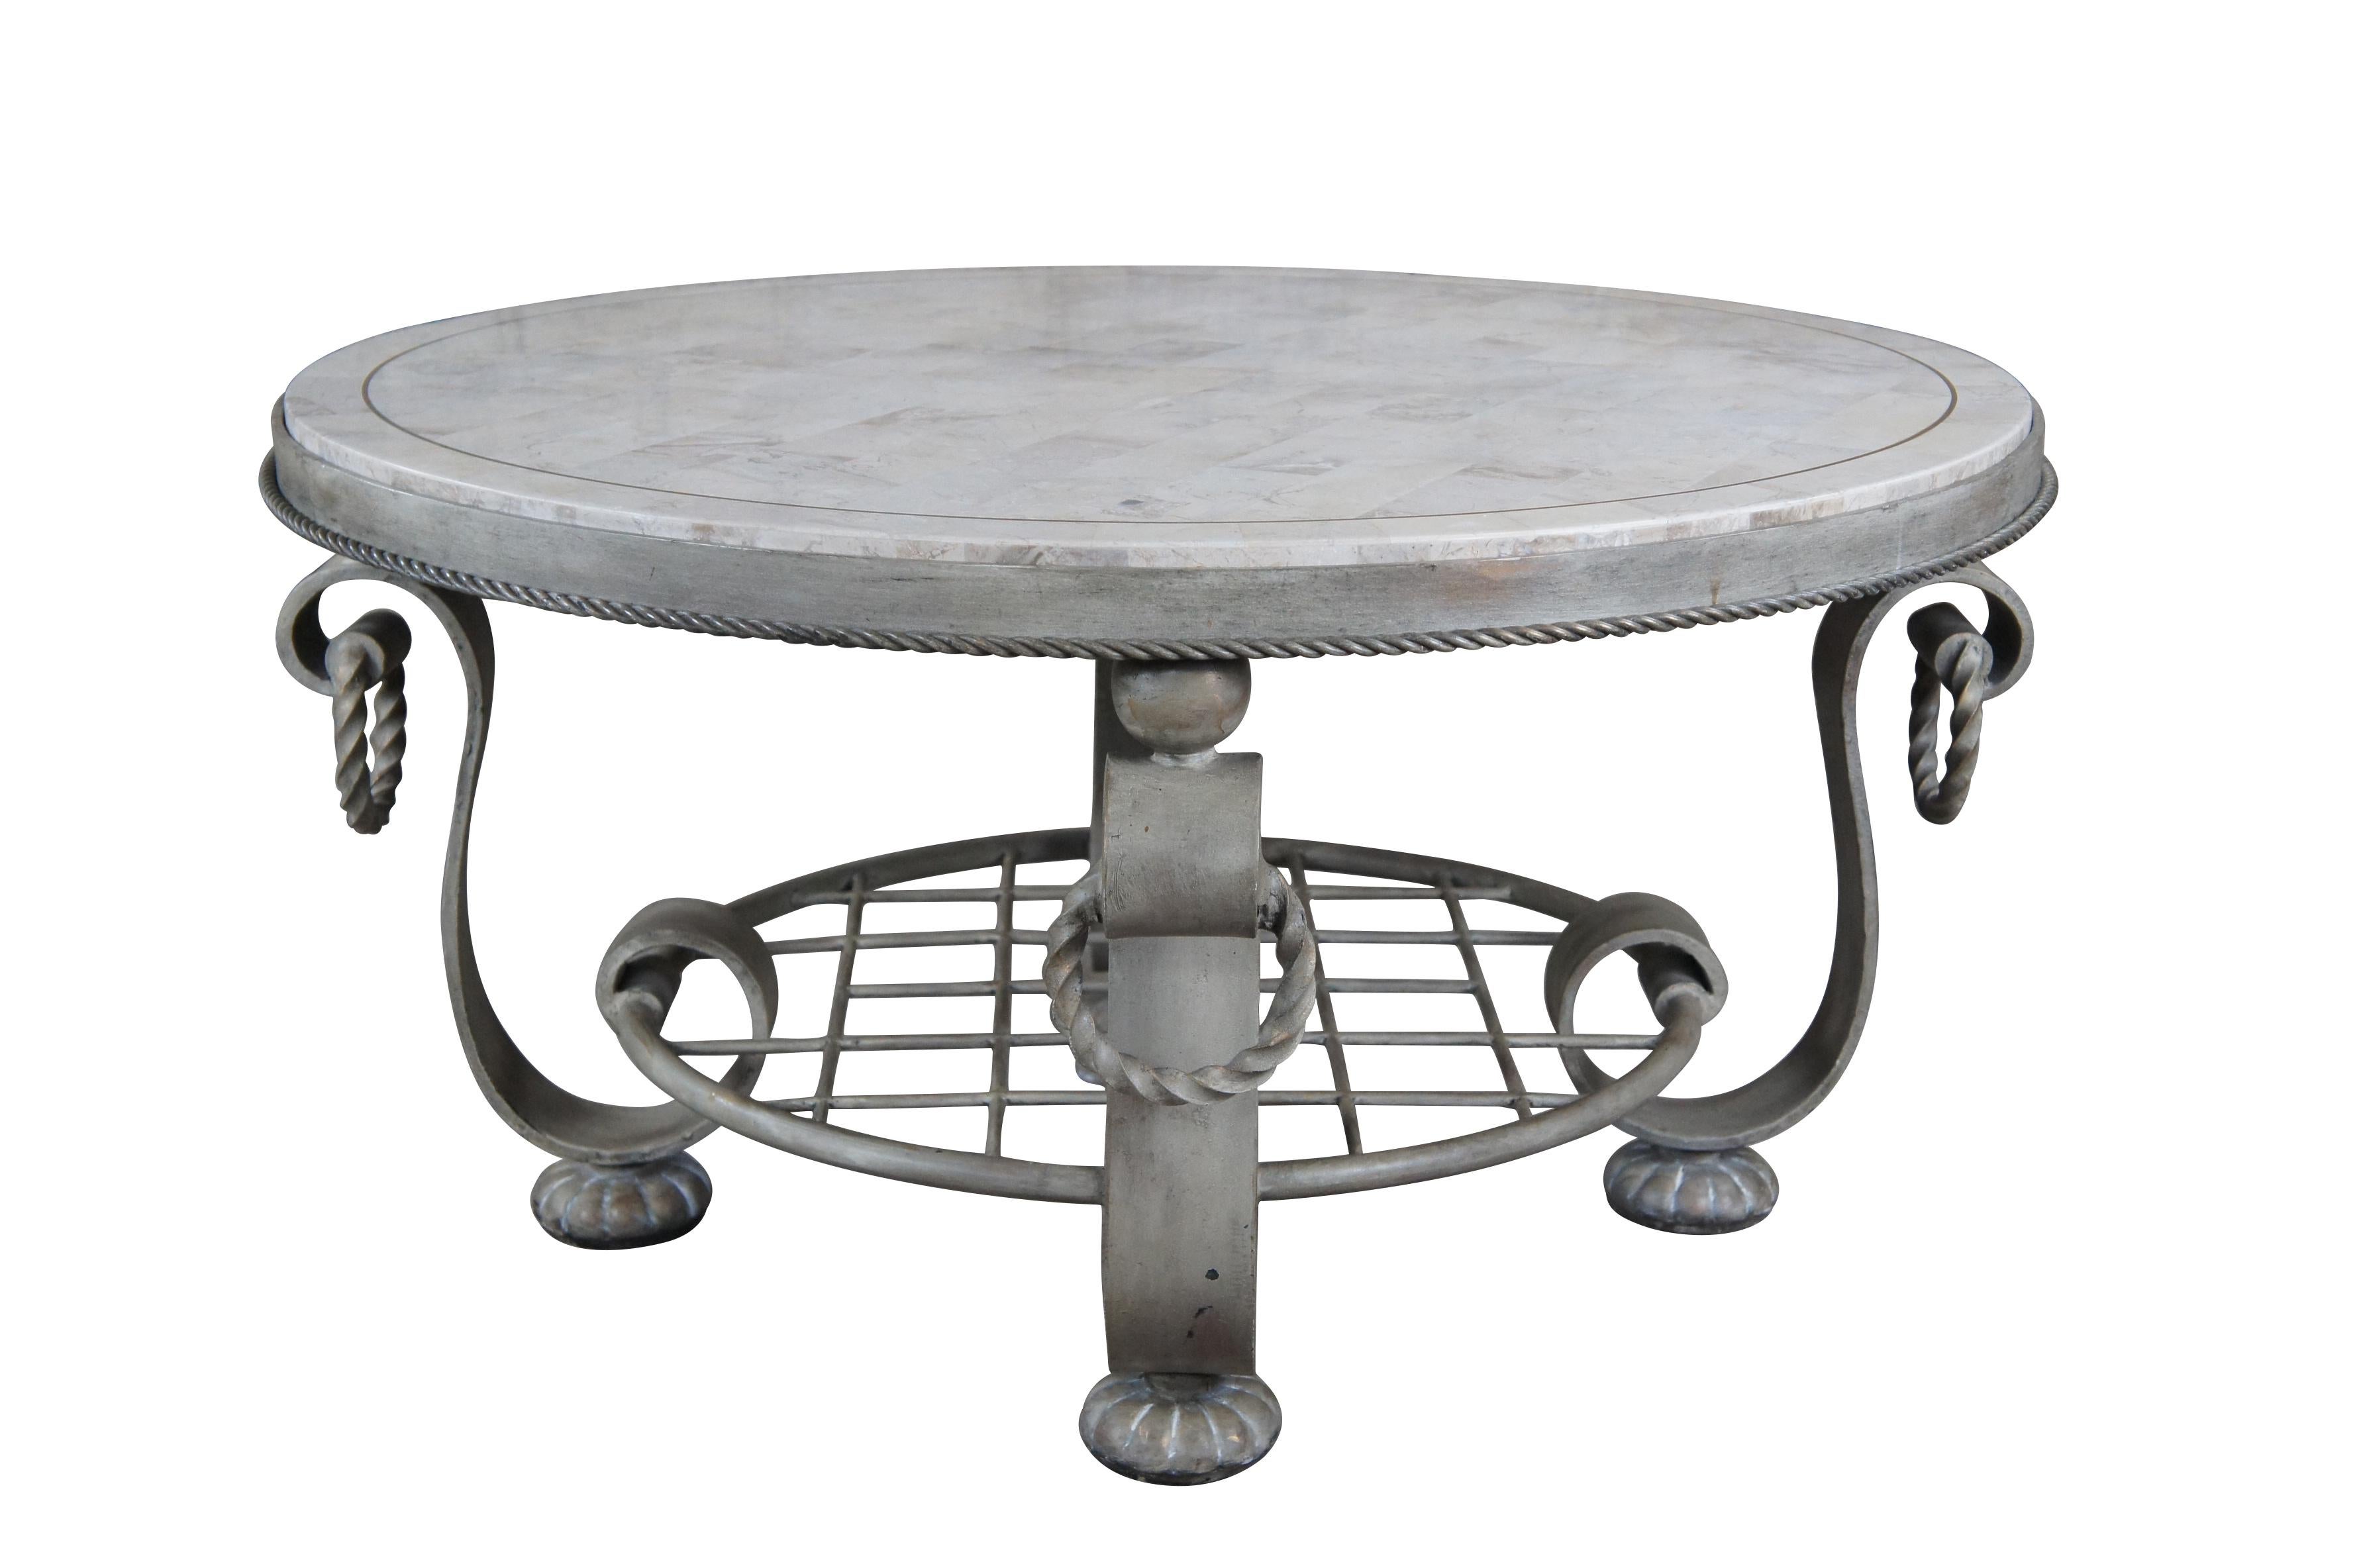 Vintage maitland Smith coffee or cocktail table featuring round form with tessellated stone top supported by heavy tiered iron base with twisted and scrolled accents.

Dimensions:
37